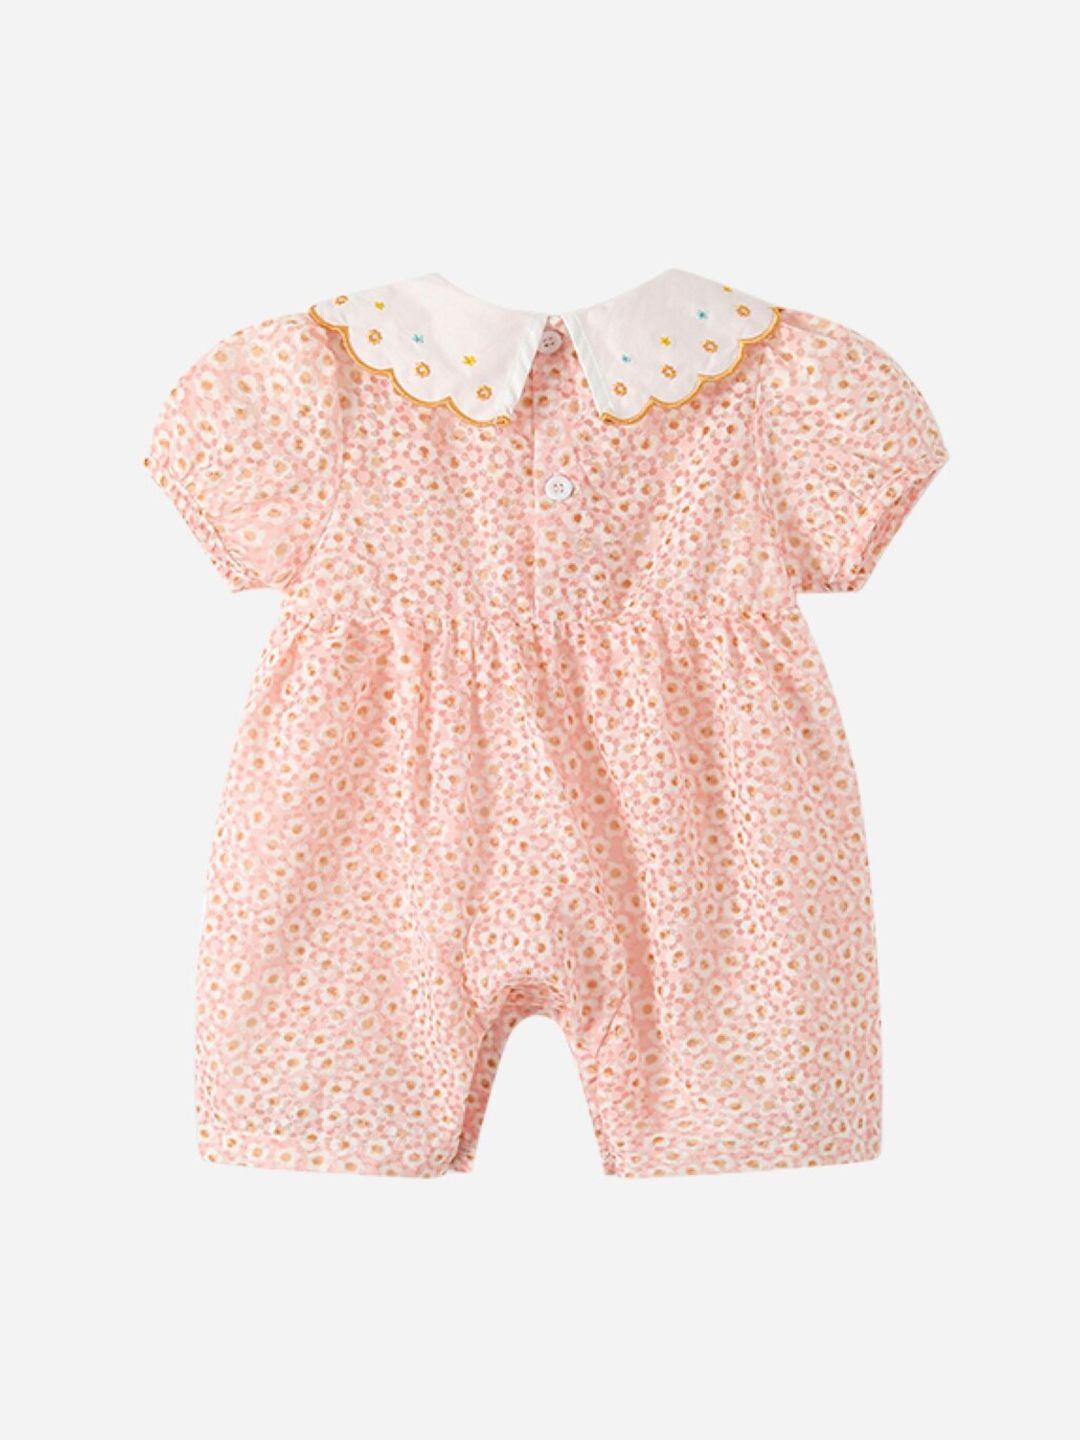 stylecast-infant-girls-pink-pure-cotton-romper